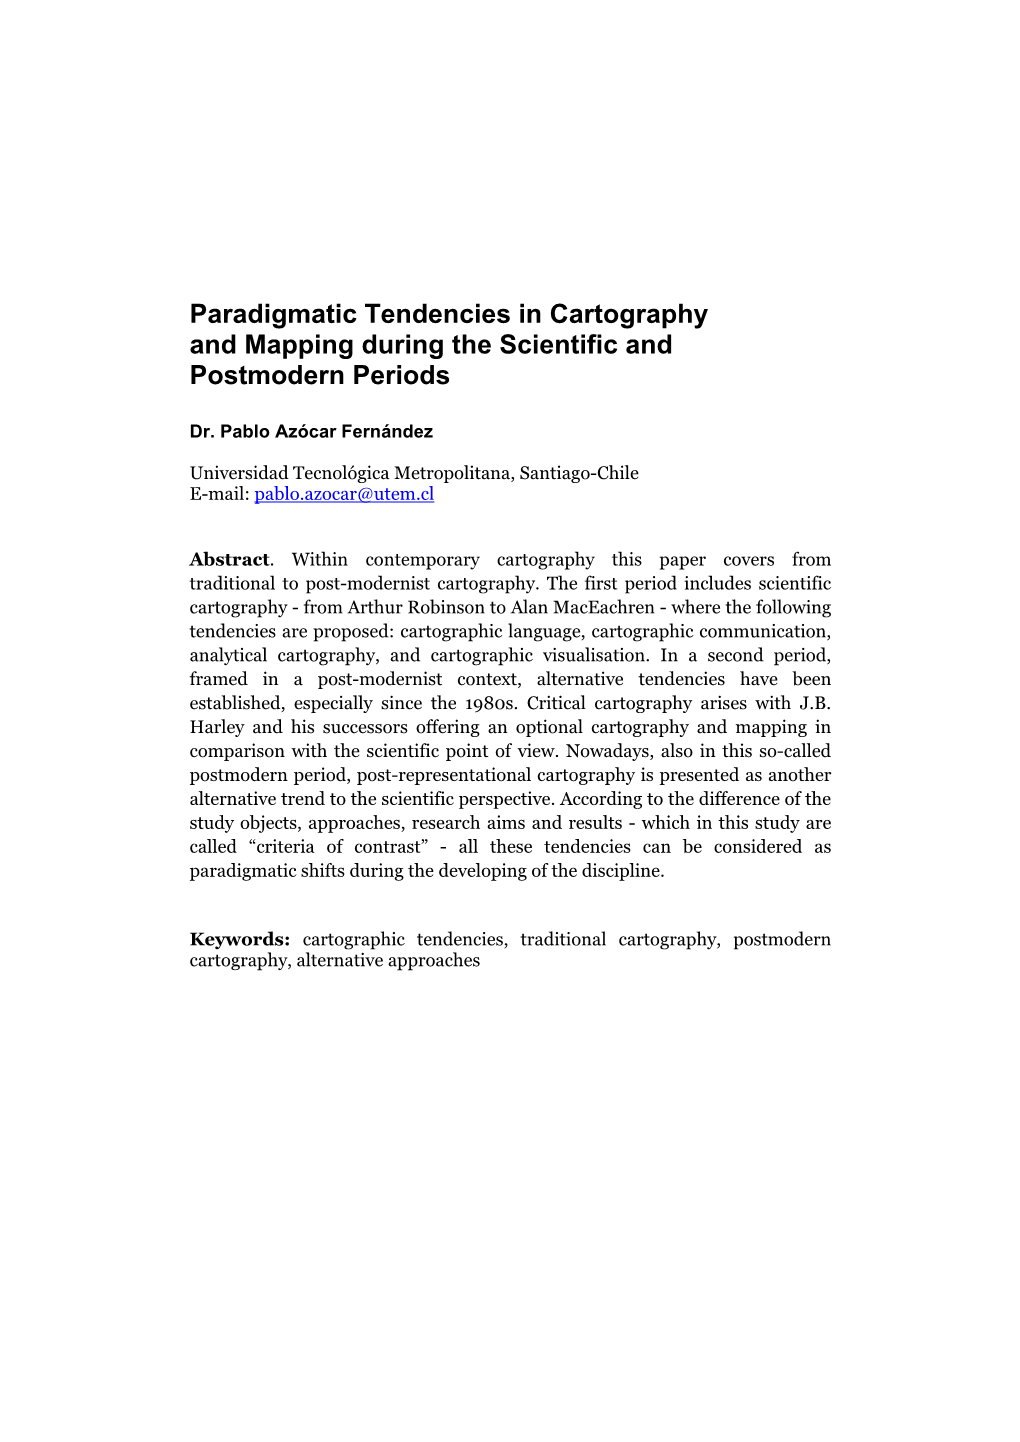 Paradigmatic Tendencies in Cartography and Mapping During the Scientific and Postmodern Periods